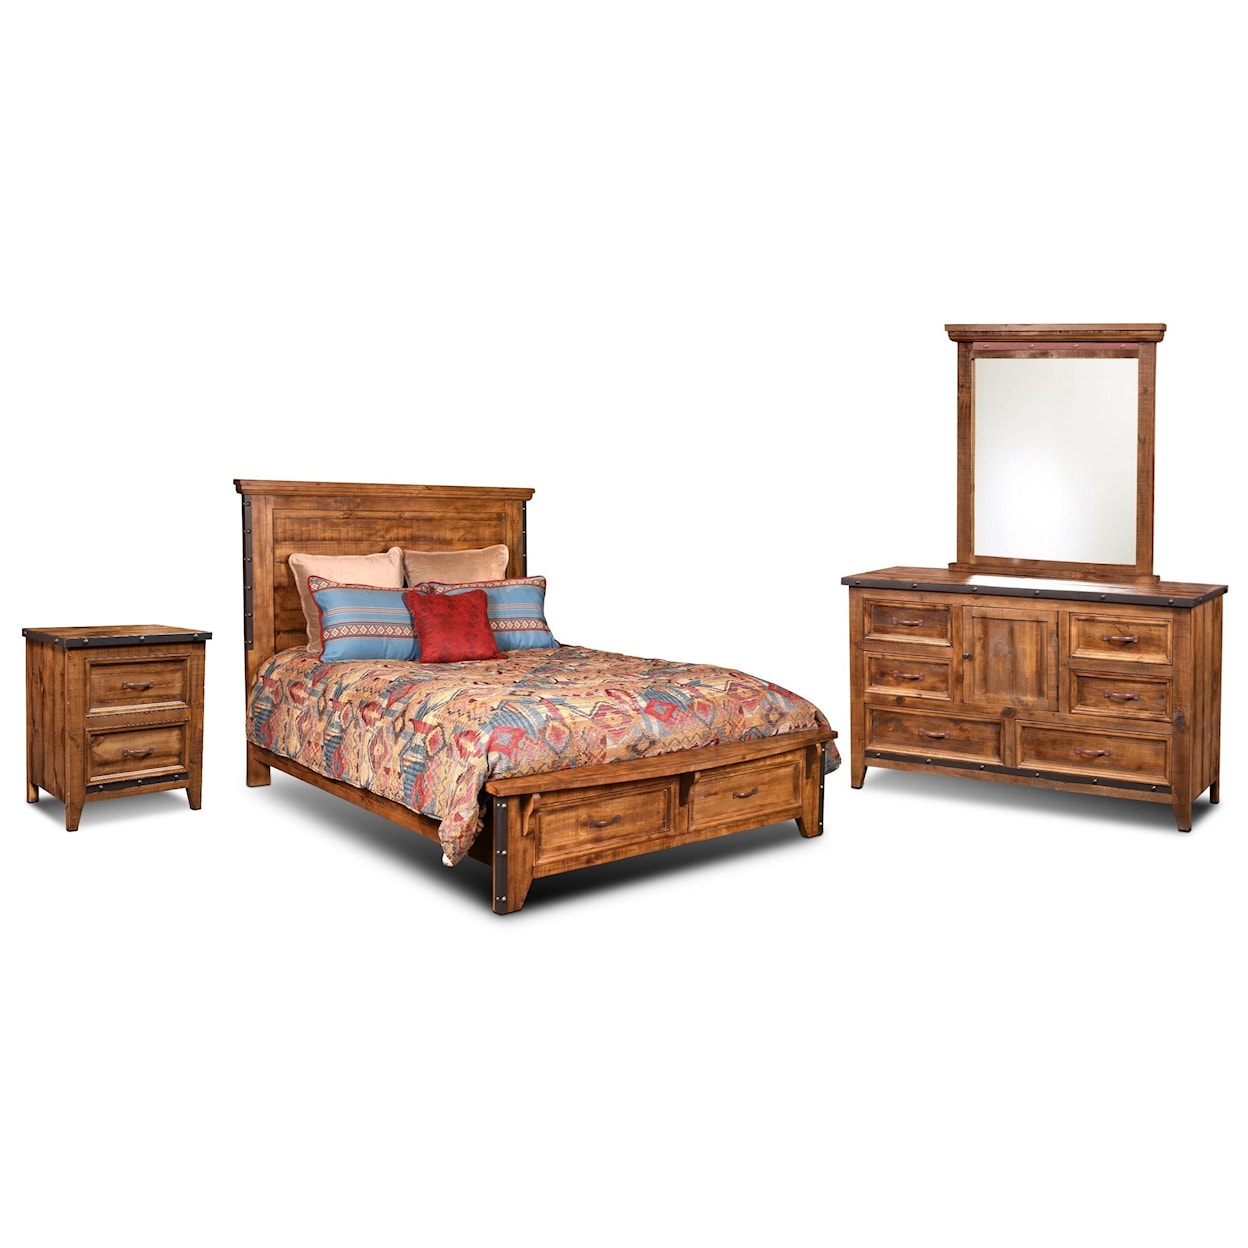 Horizon Home Urban Rustic East King Bed Dresser Mirror and Nightstand